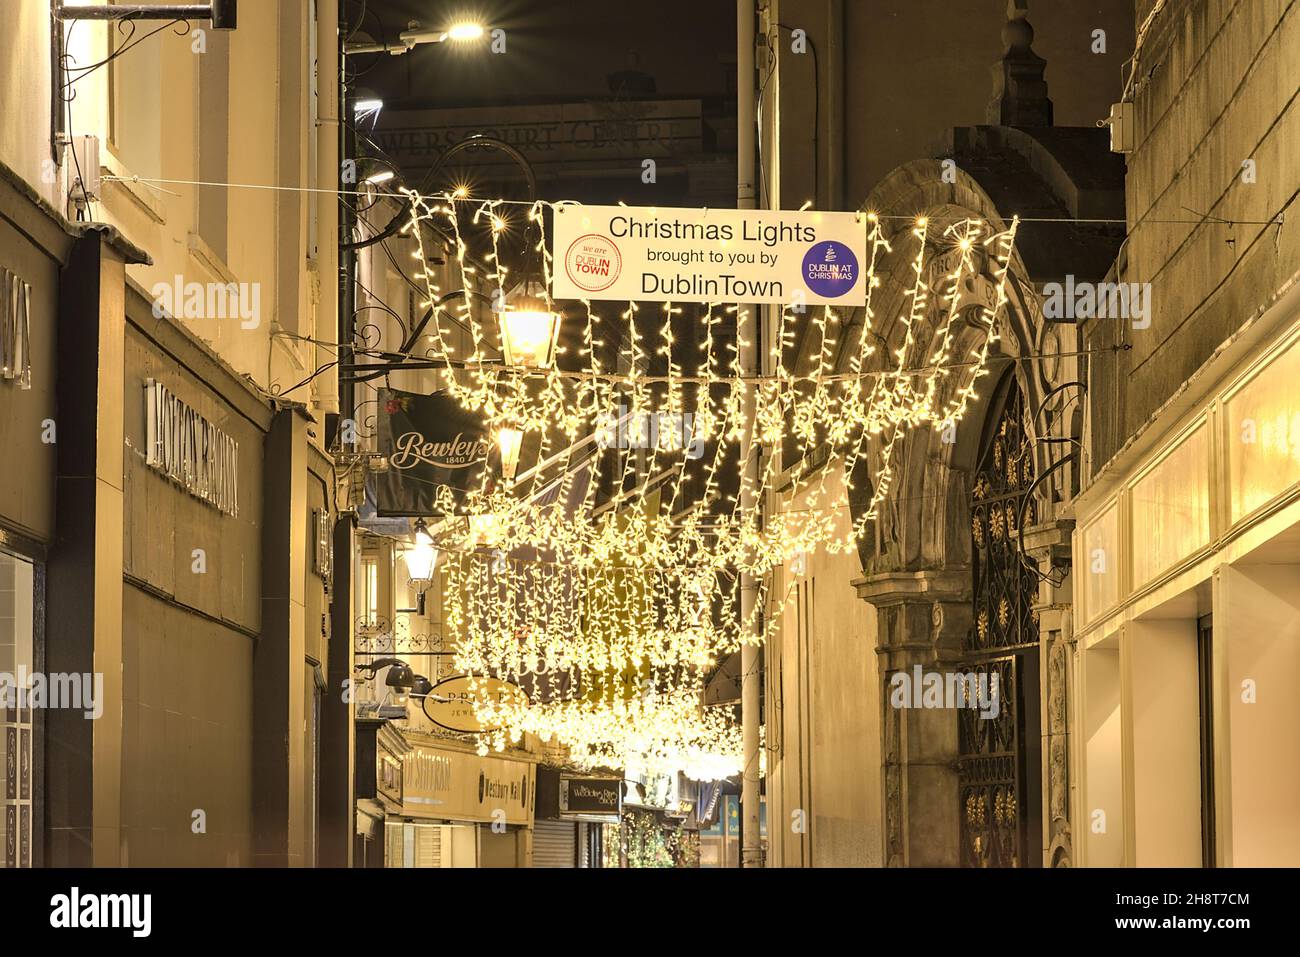 Dublin, Ireland - November 13. 2021: Beautiful evening view of Christmas lights decorations brought to you by Dublin Town on Johnson's Court Stock Photo